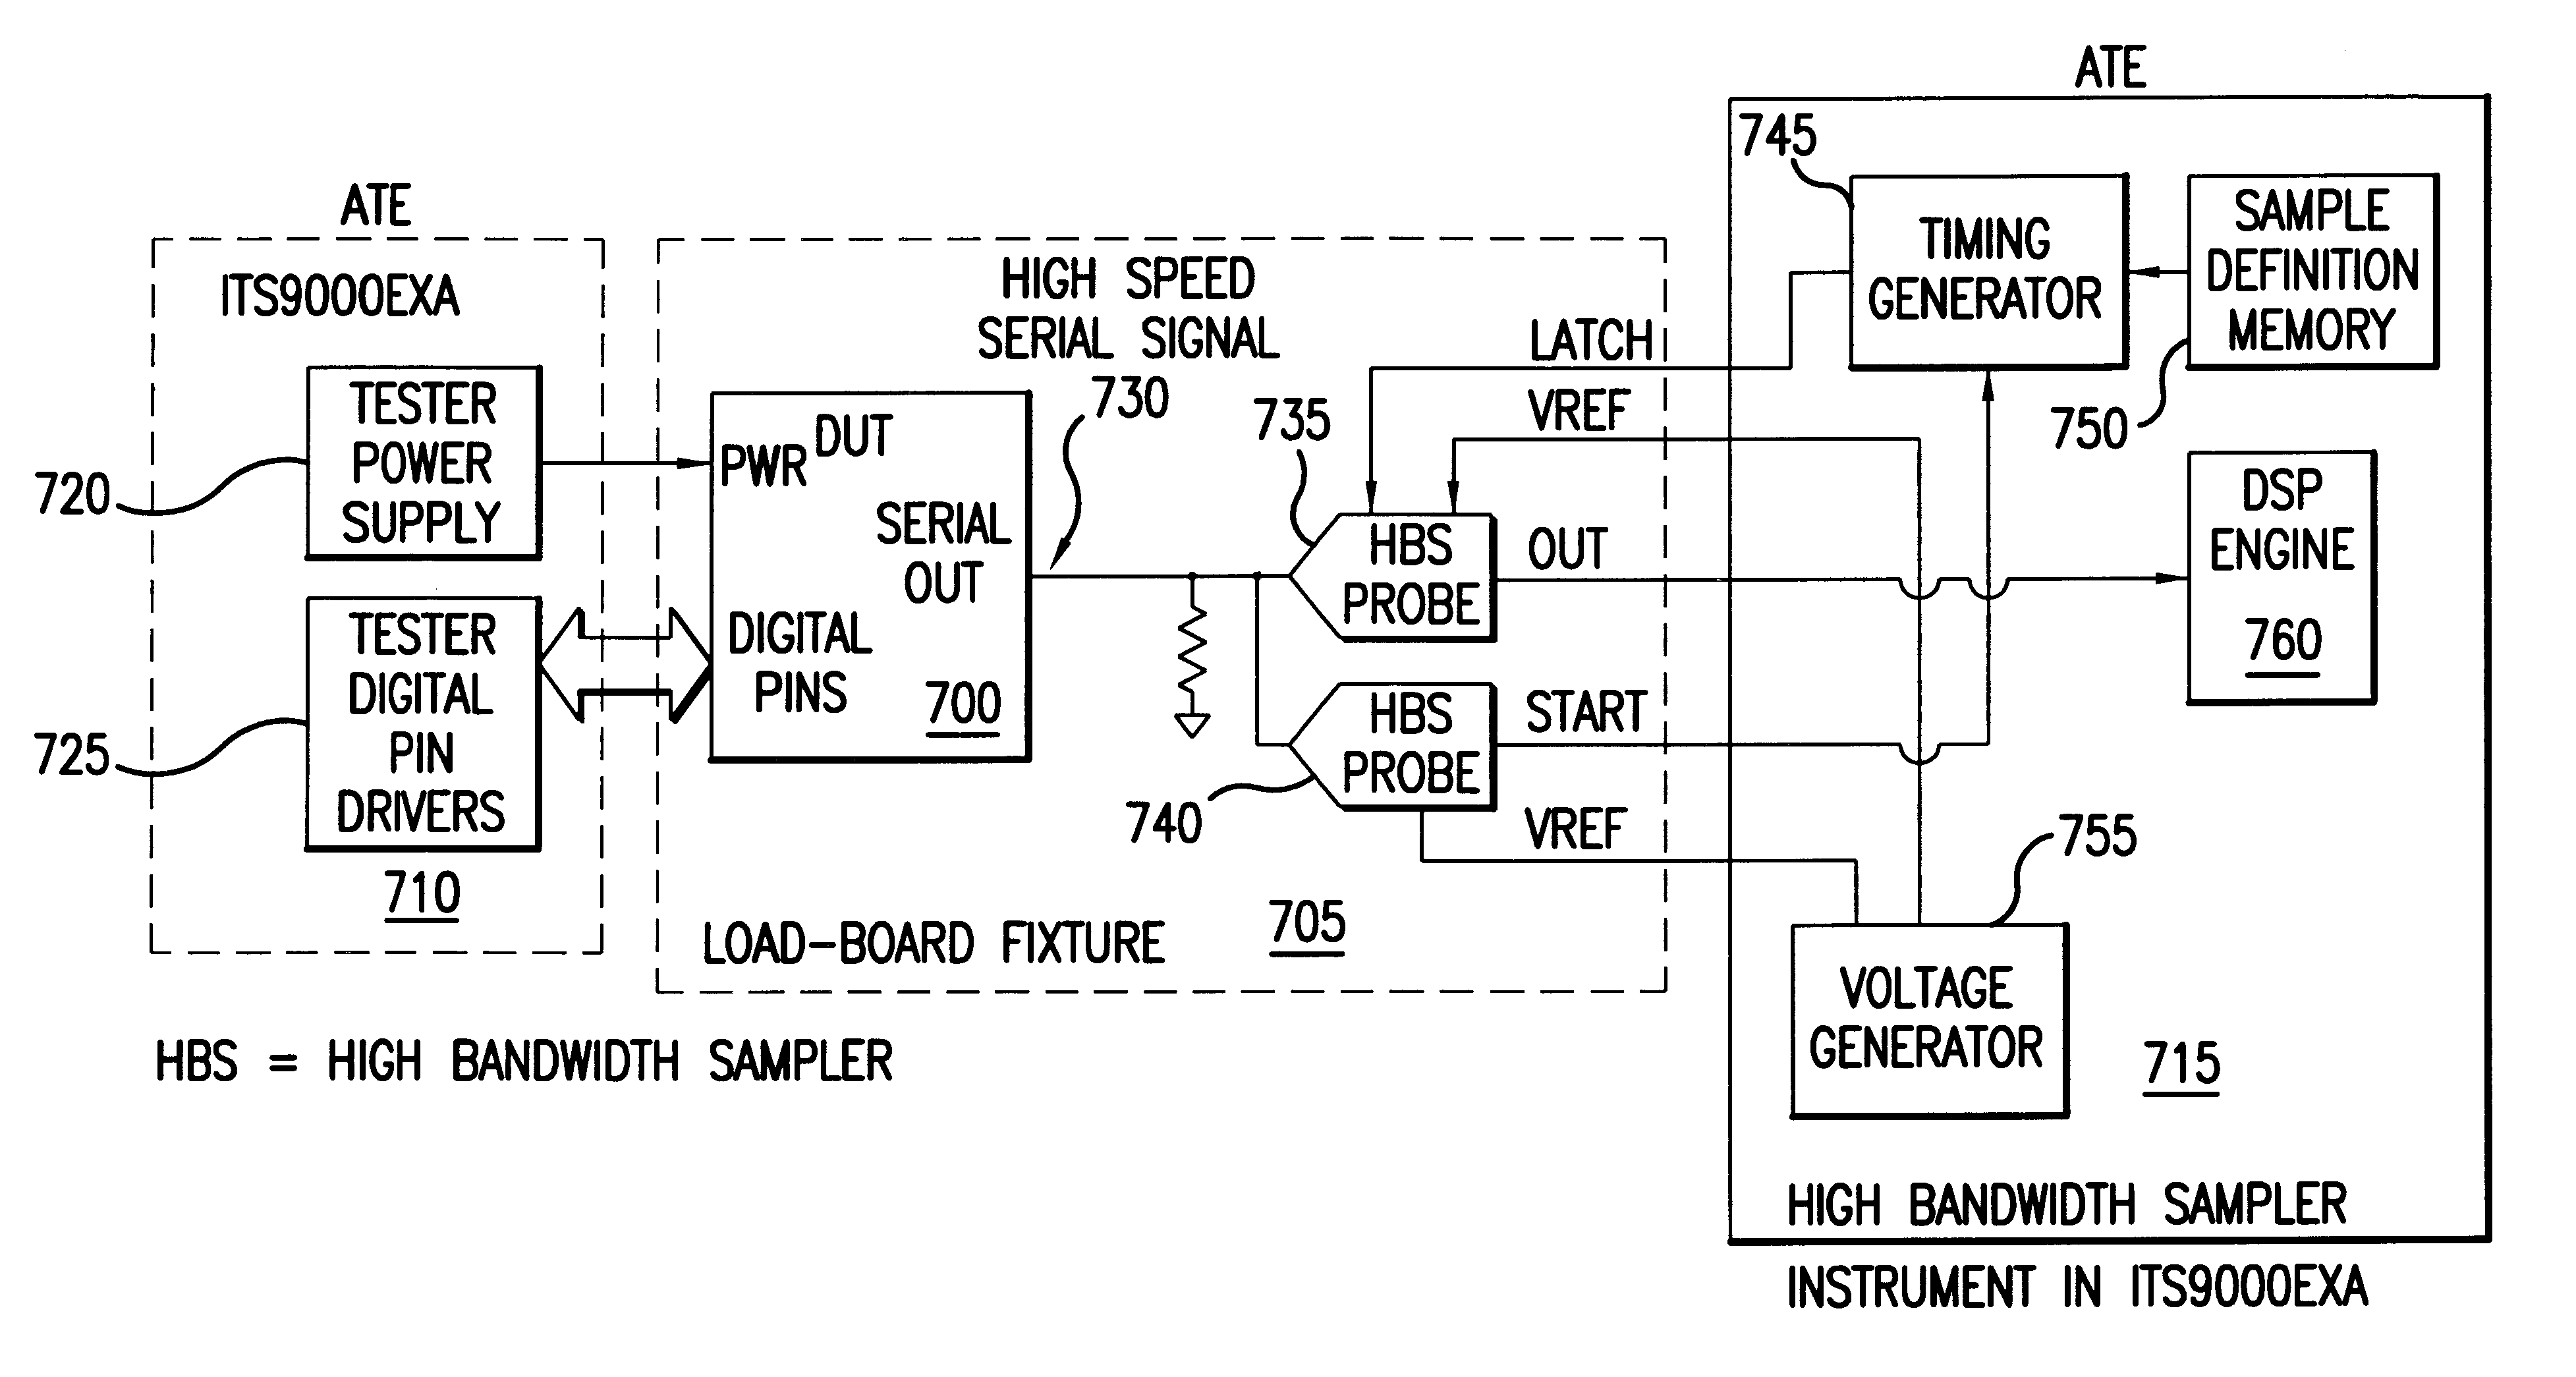 Measuring jitter of high-speed data channels